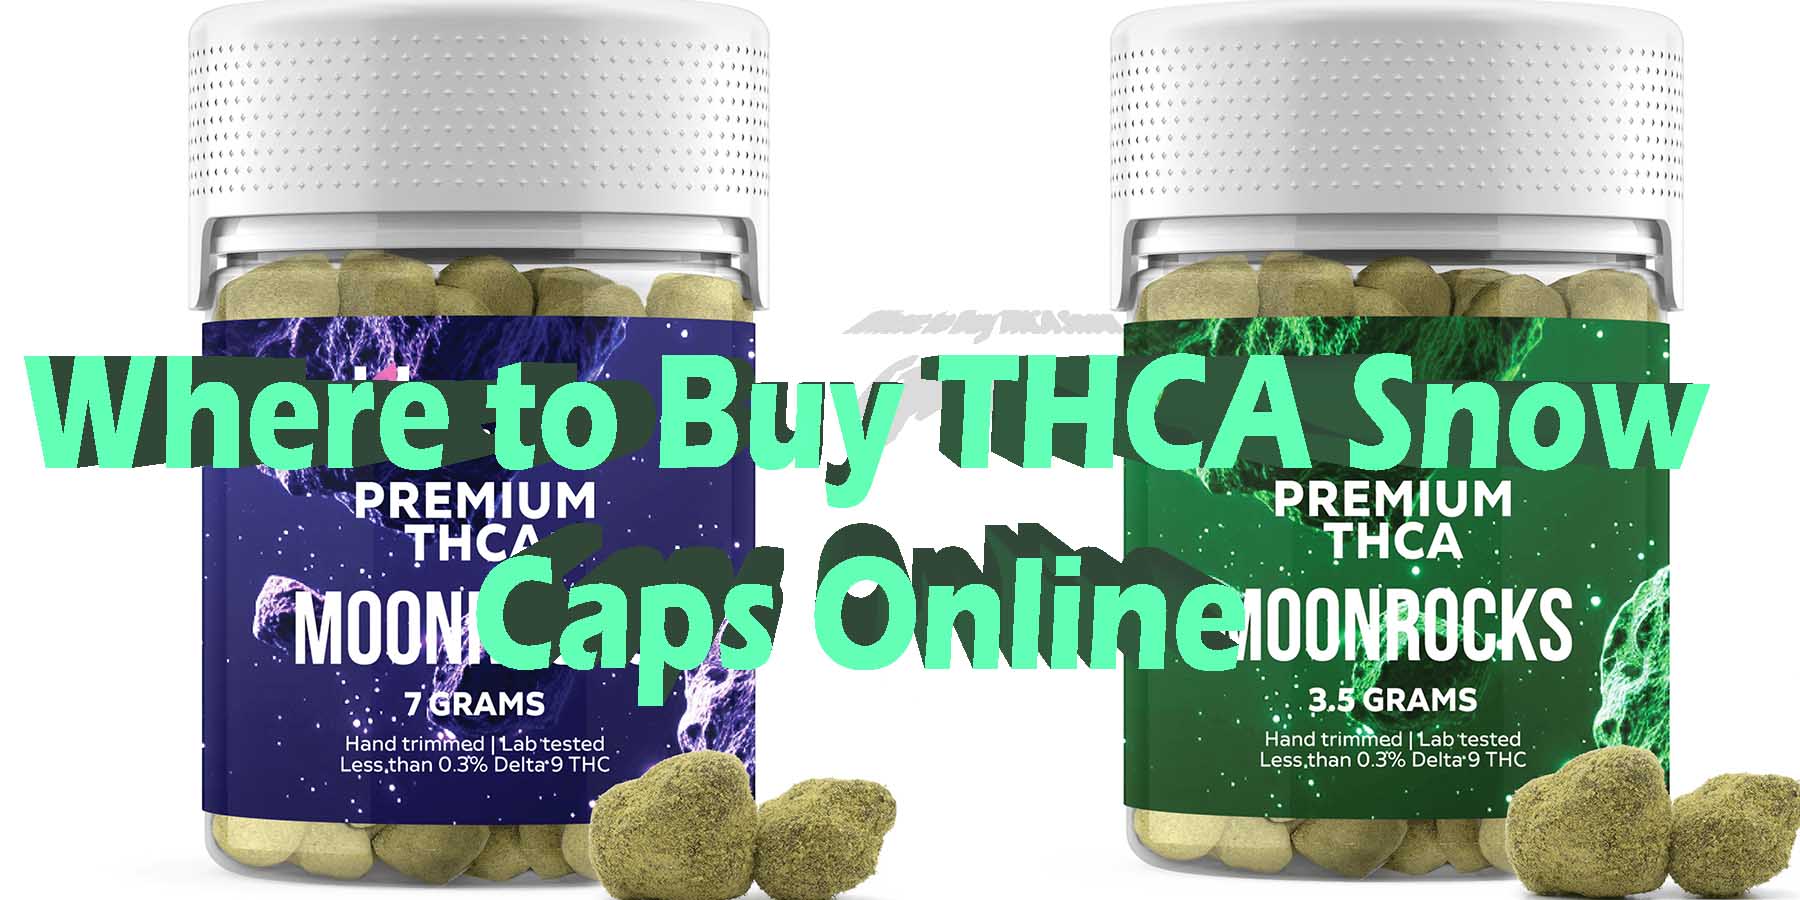 Where to Buy THCA Snow Caps Online LowestPrice Coupon Discount For Smoking Best High Smoke THCA THC Cannabinoids Shop Online Near Me Bloomz